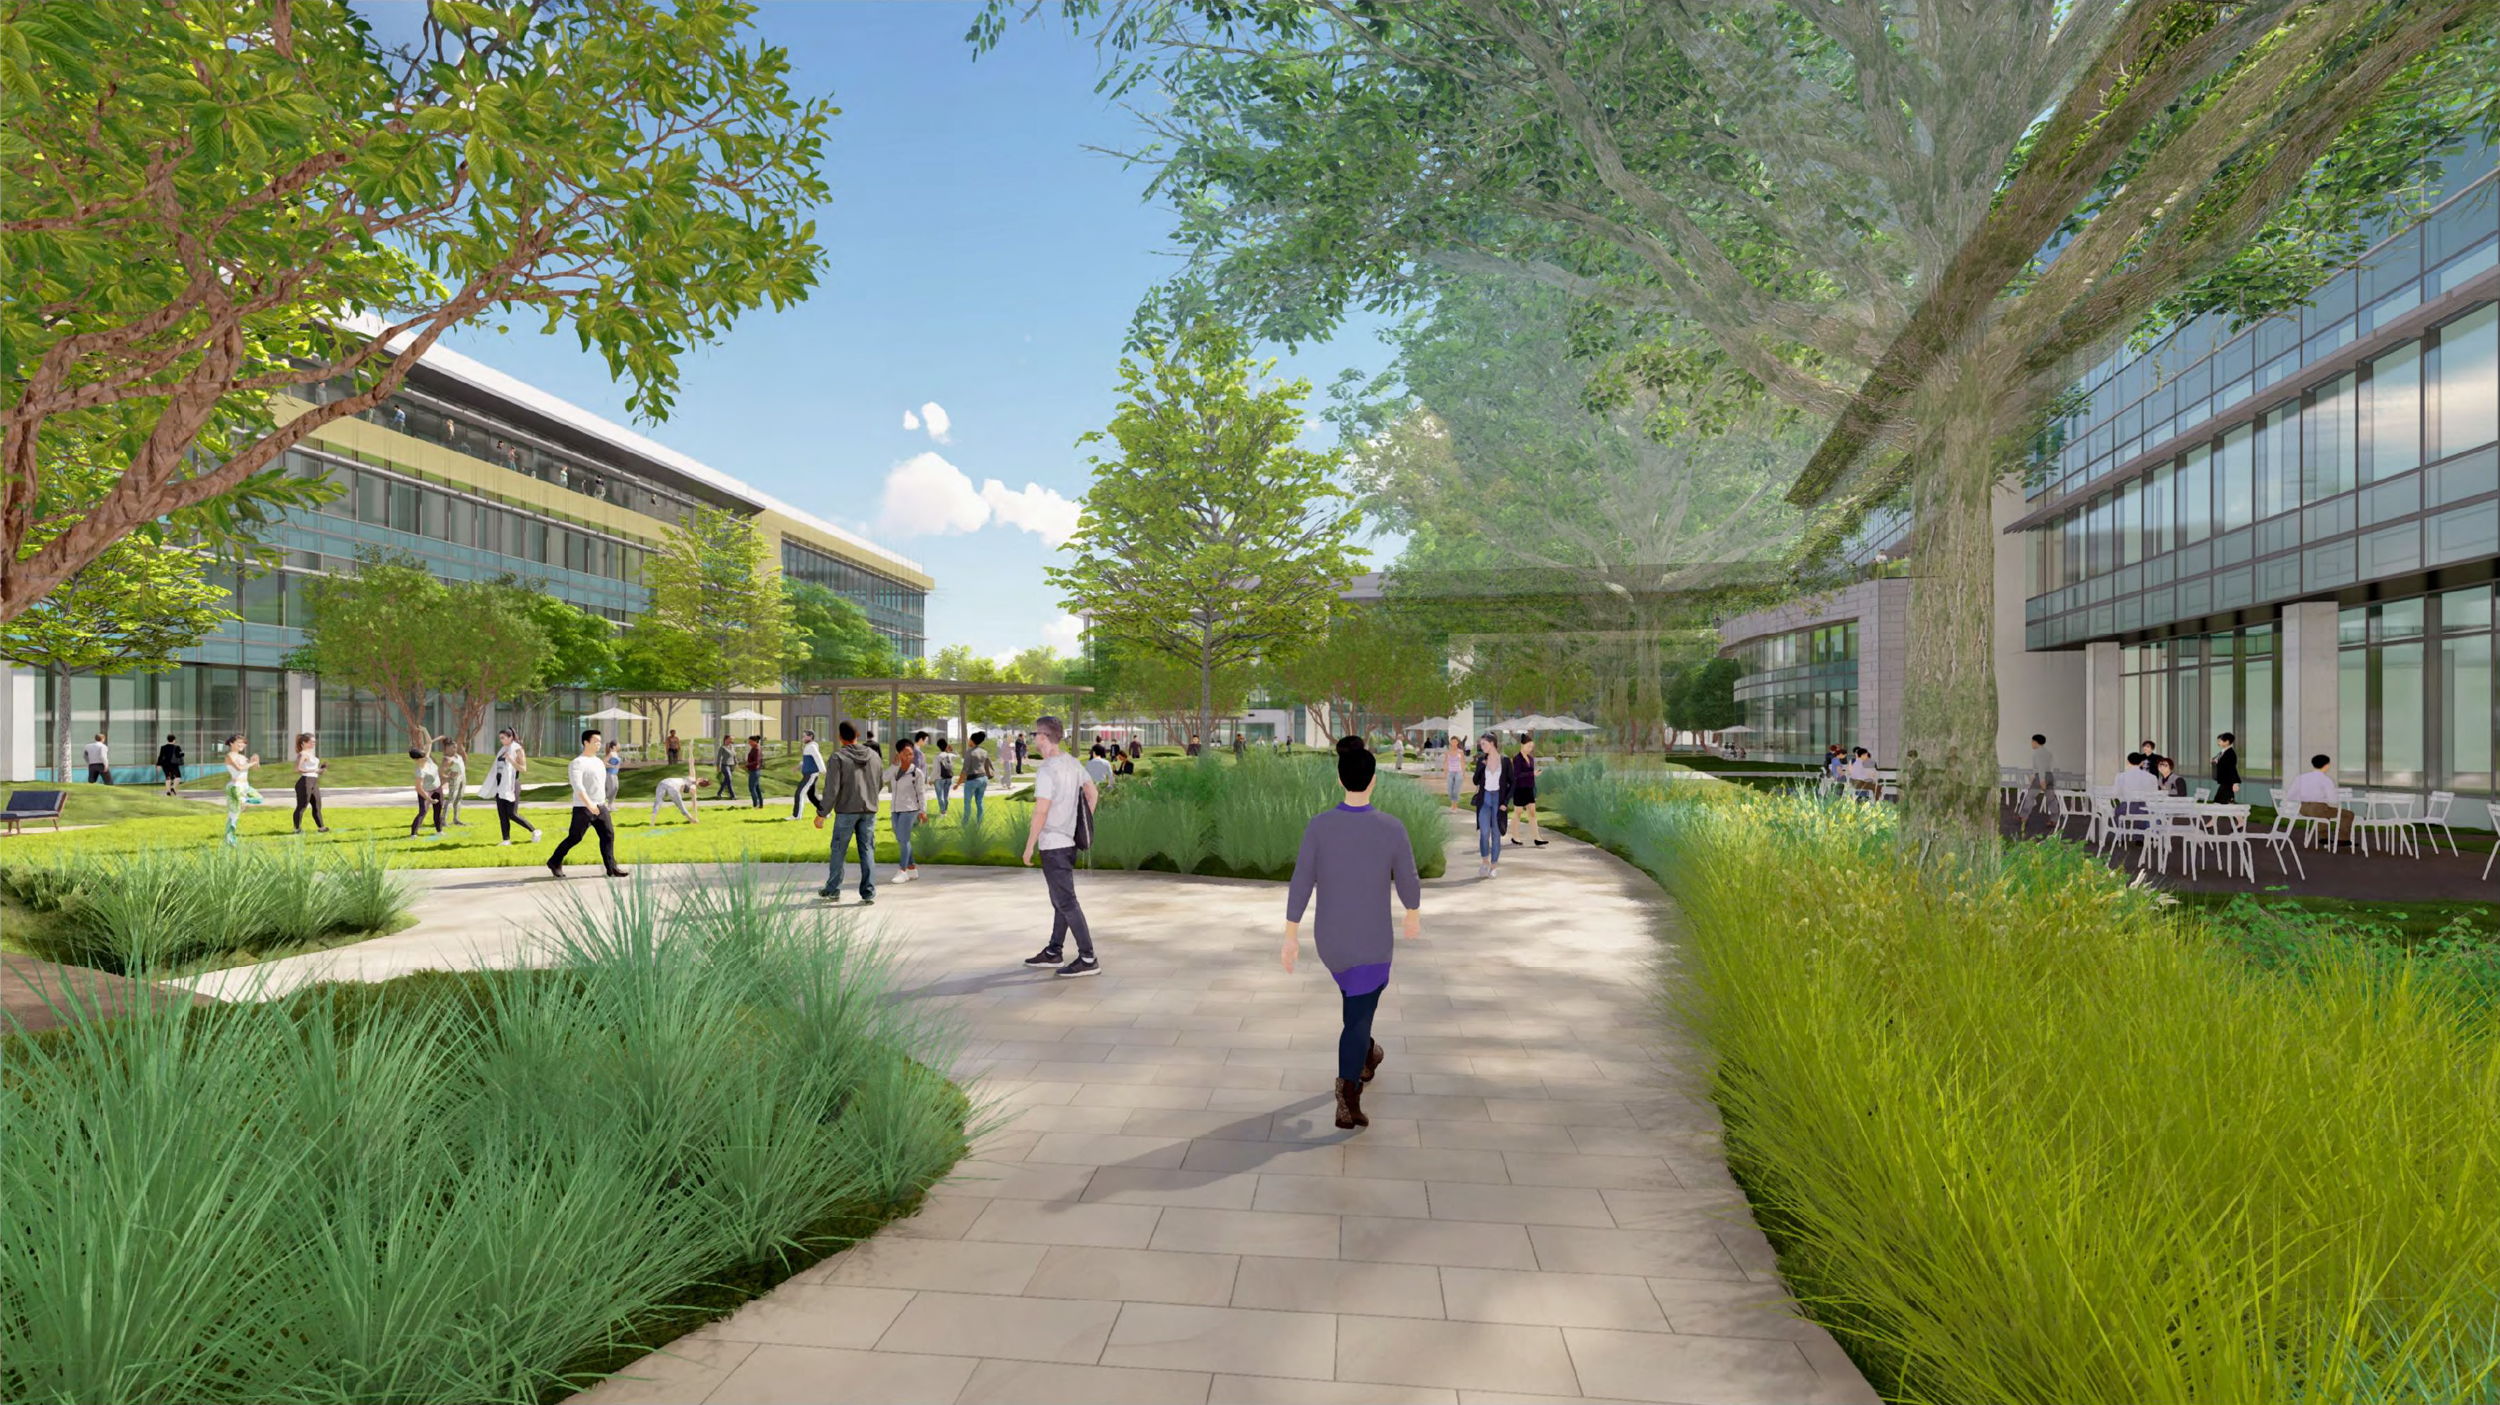 Parkline pedestrian path between the offices, rendering by STUDIOS Architecture